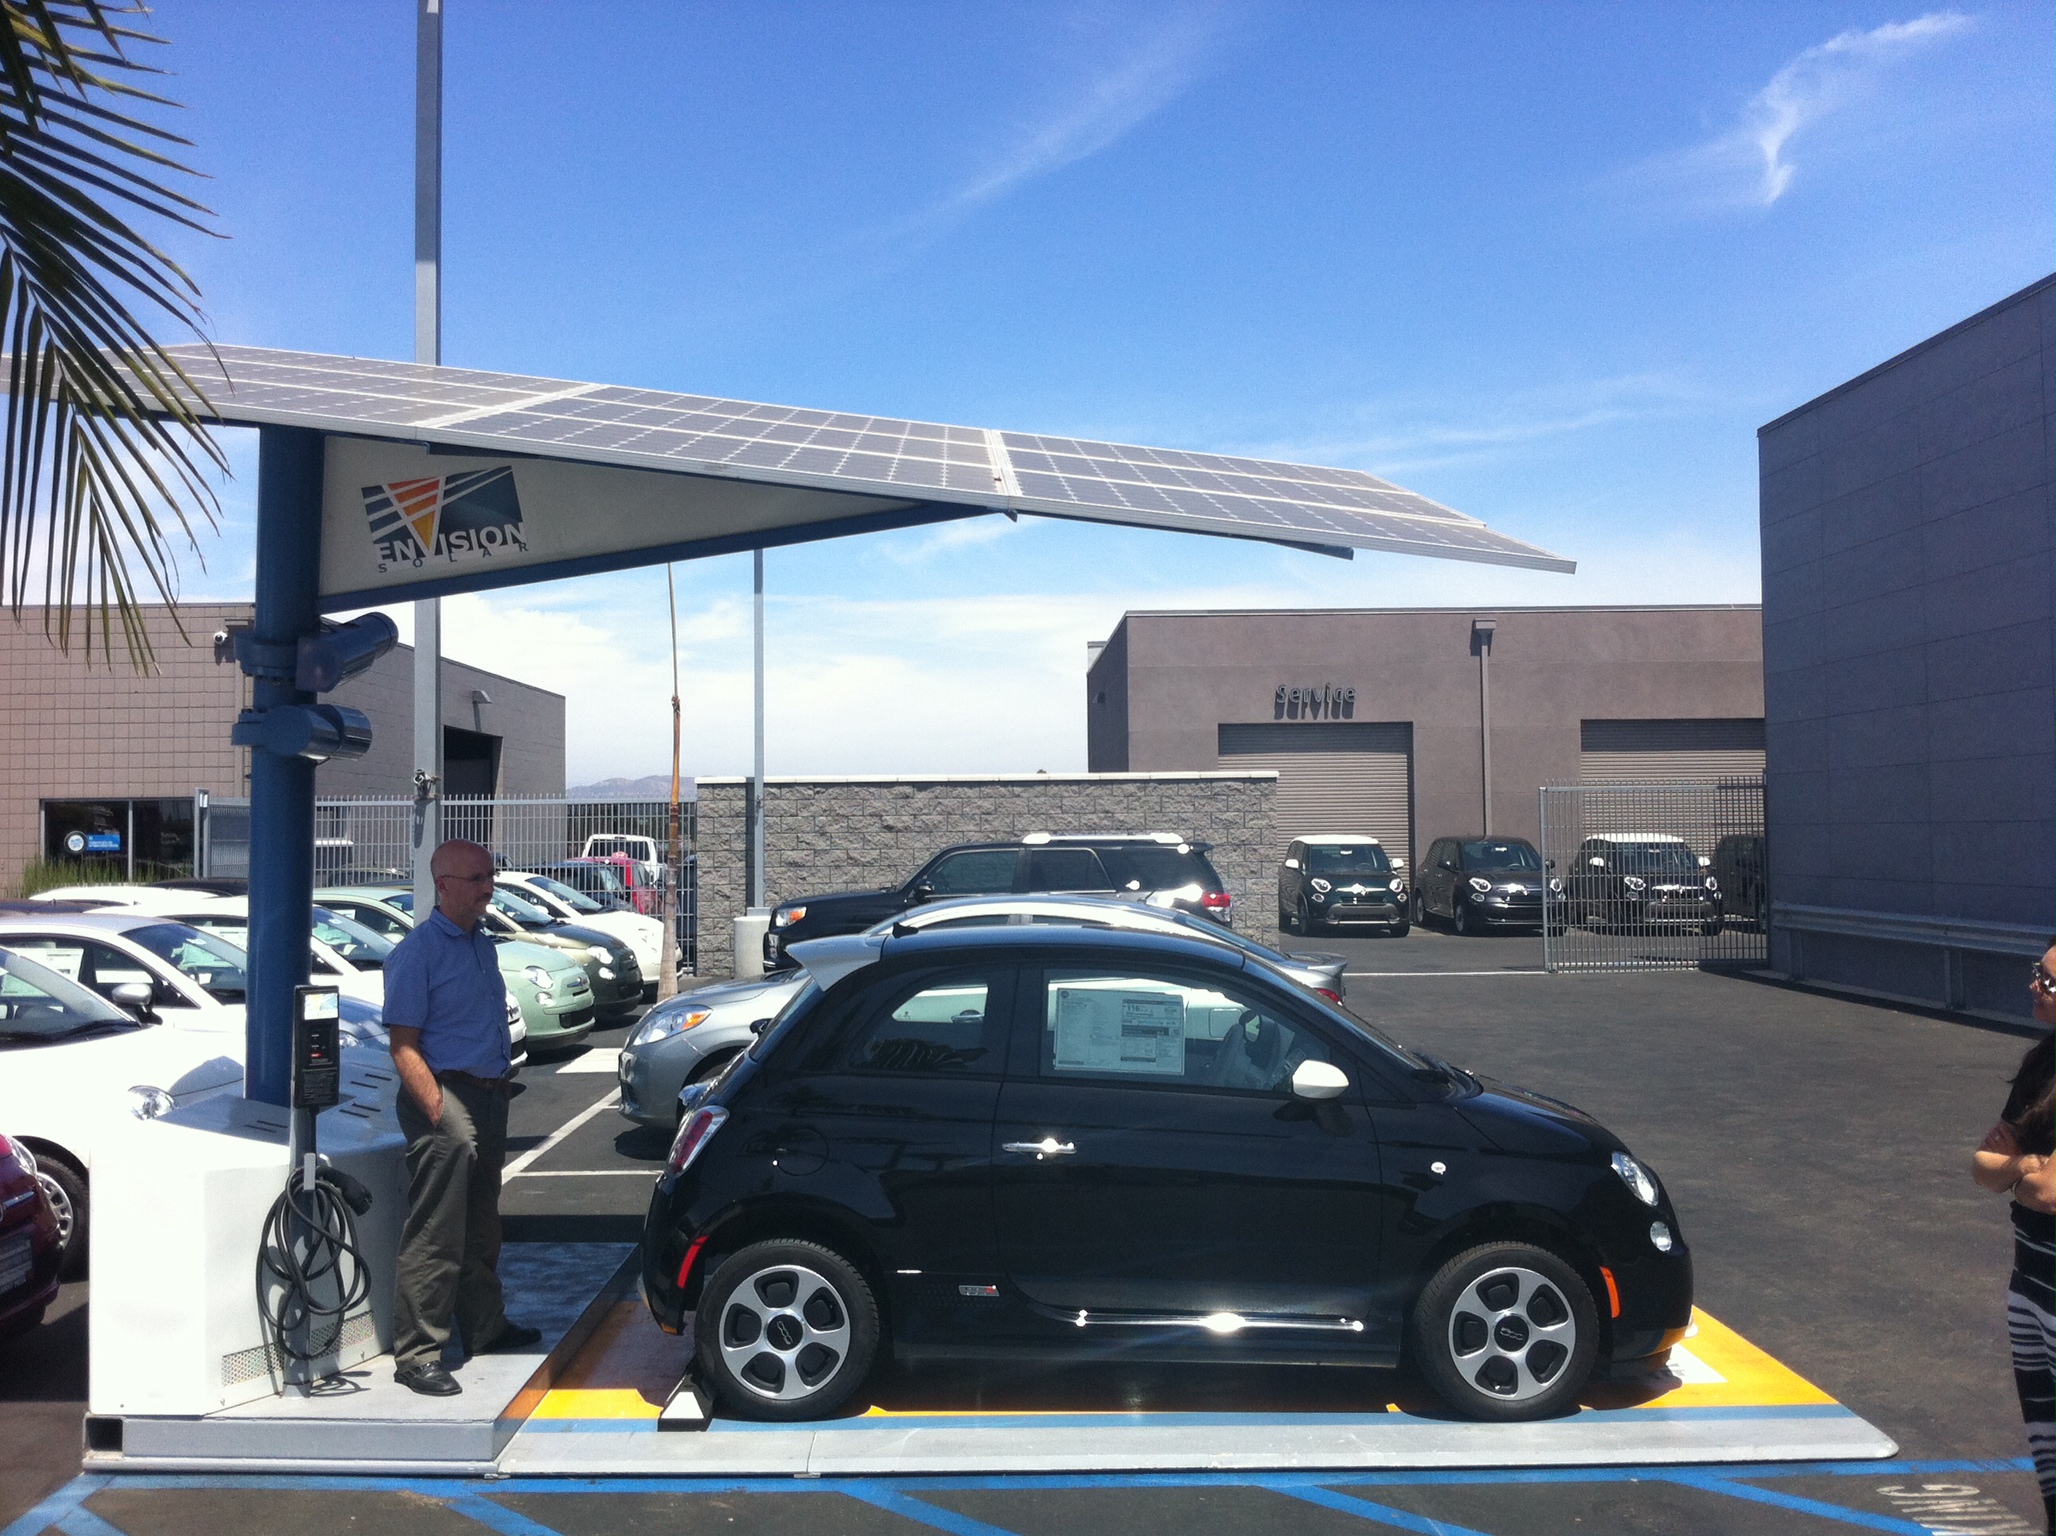 A man standing next to a small black car underneath a large solar panel in a sunny parking lot next to a palm tree.